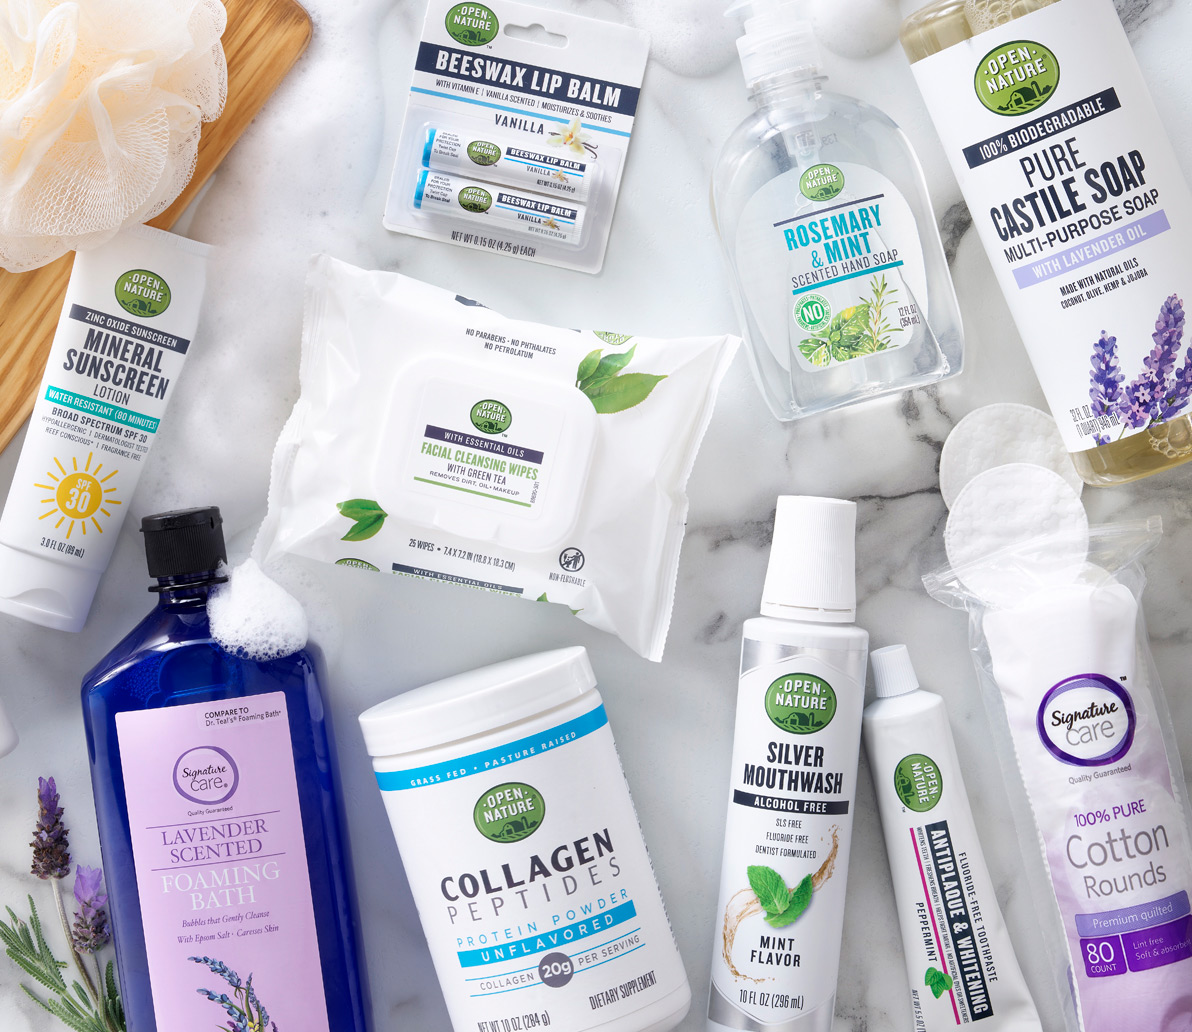 Own Brands self-care products